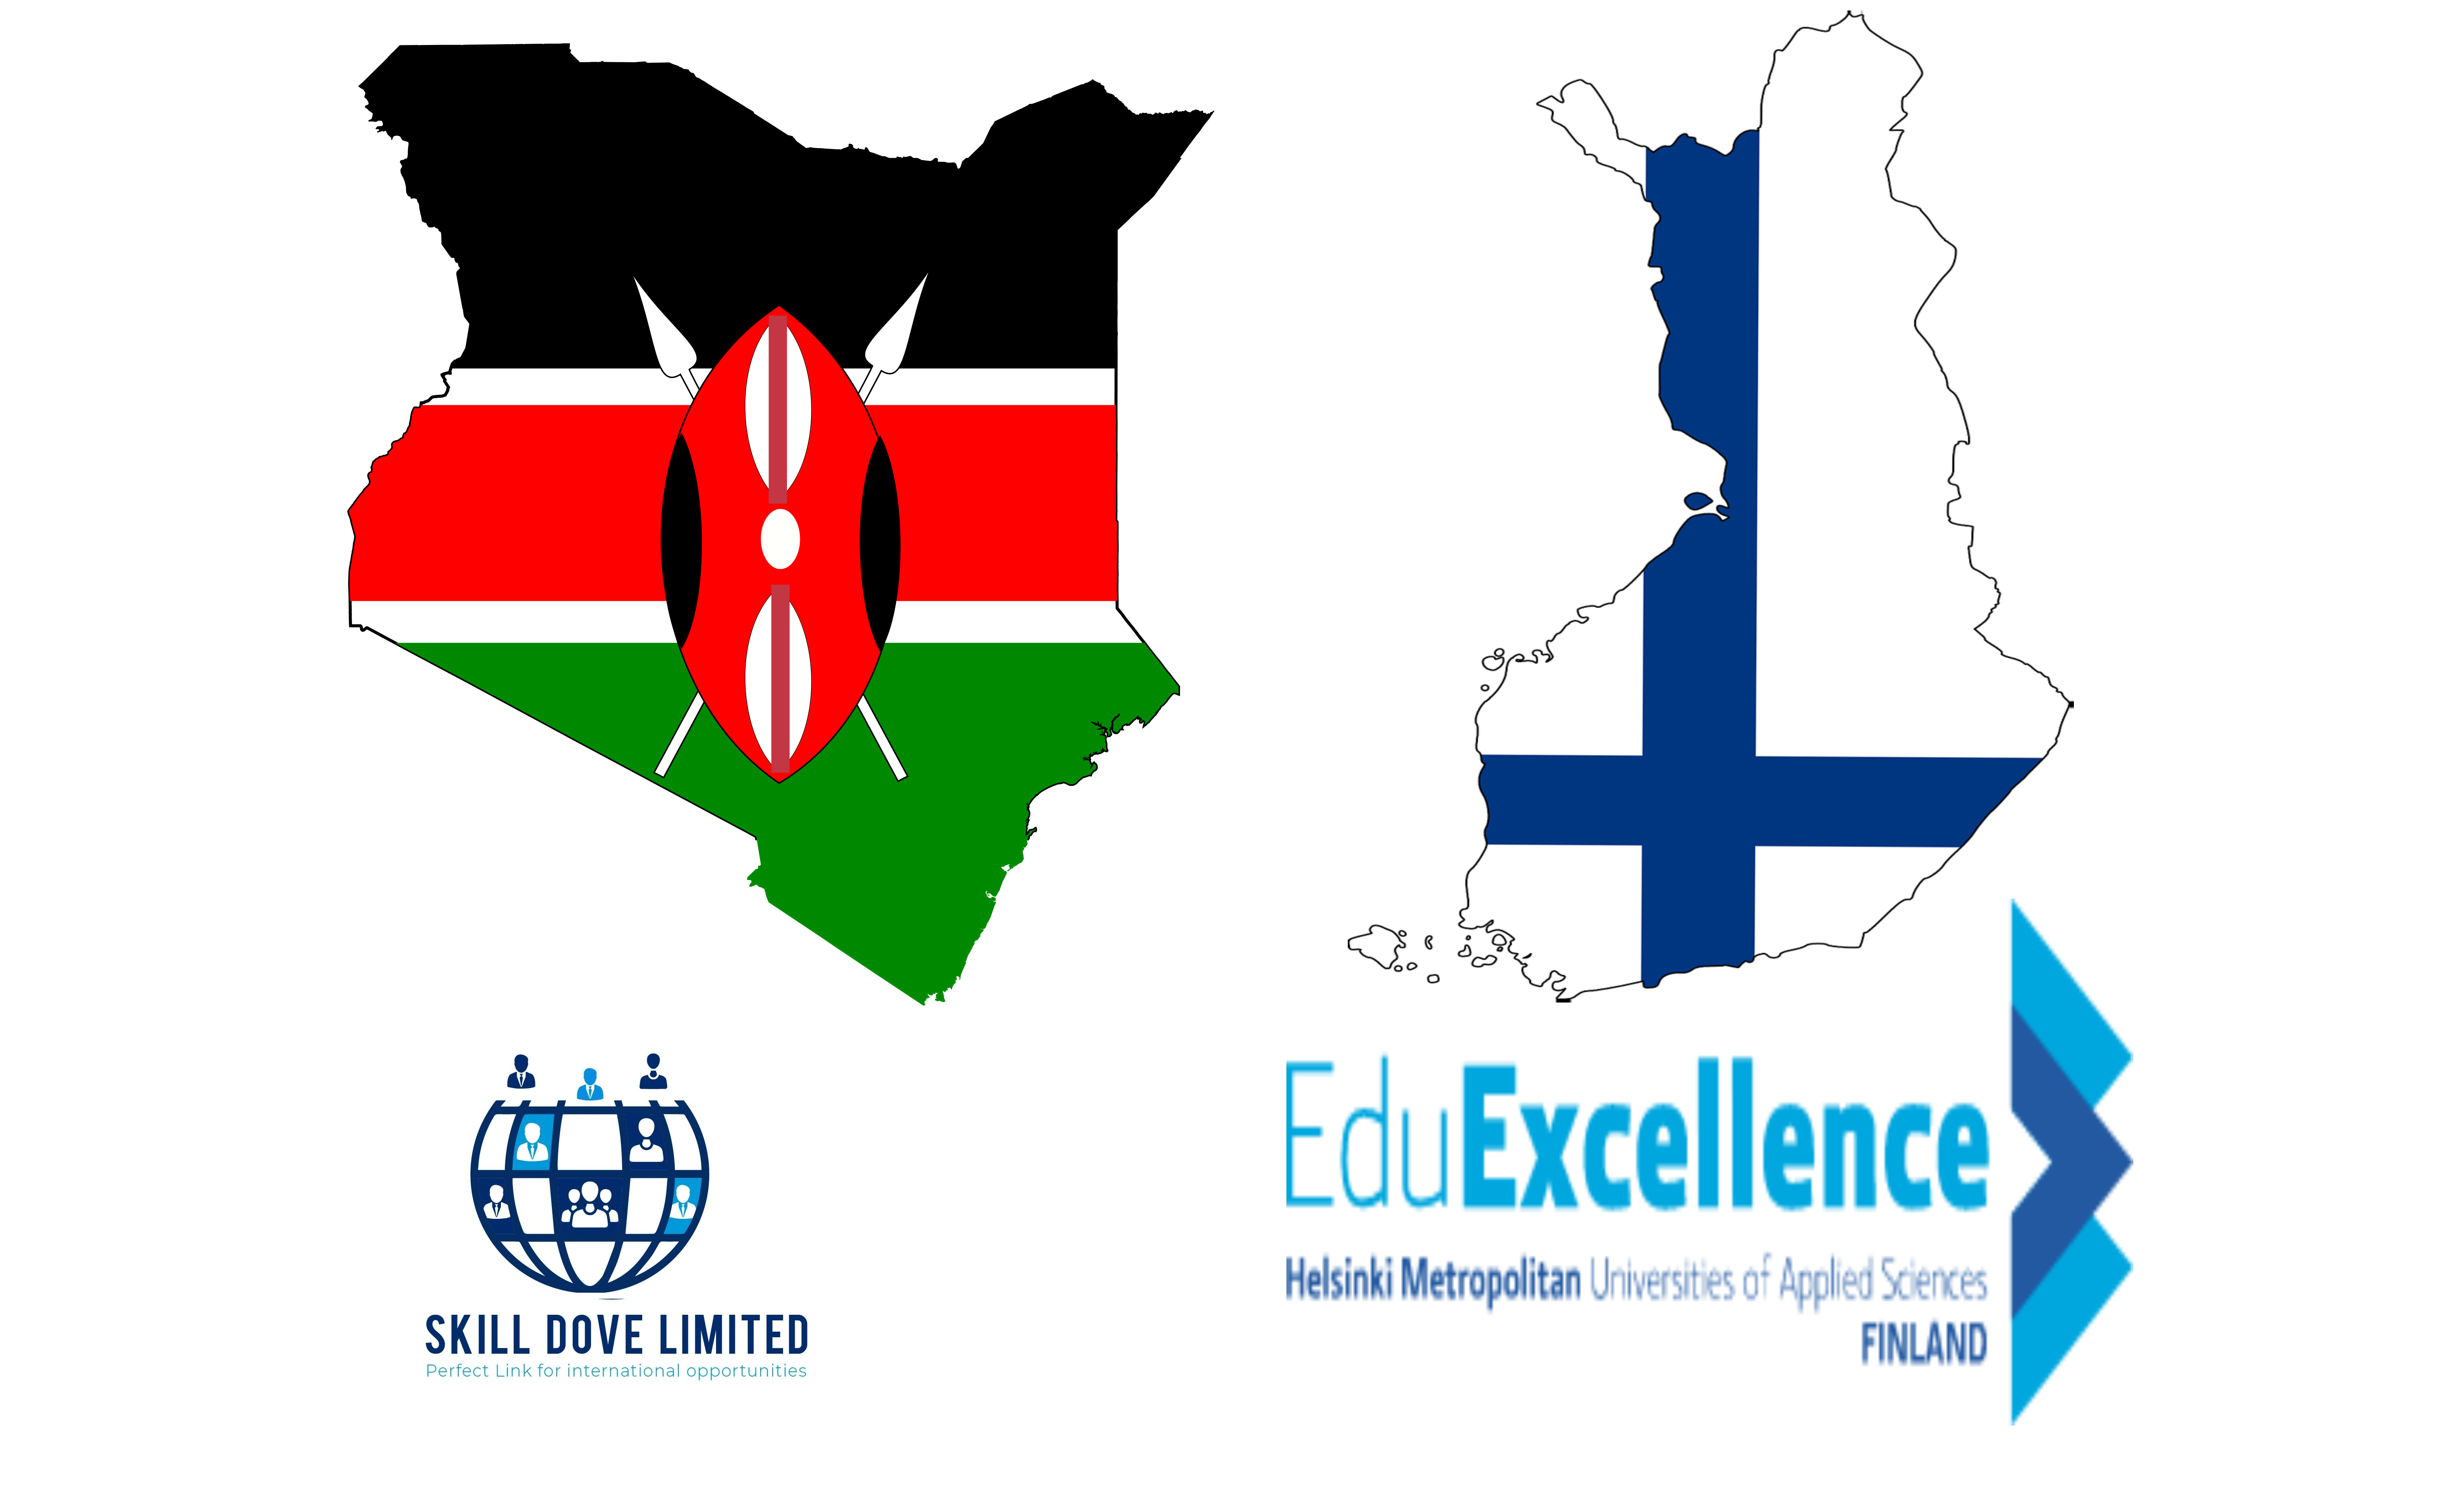 Press release 31.1.2022: The largest commercial degree programme co-operation in Finnish history to Kenya